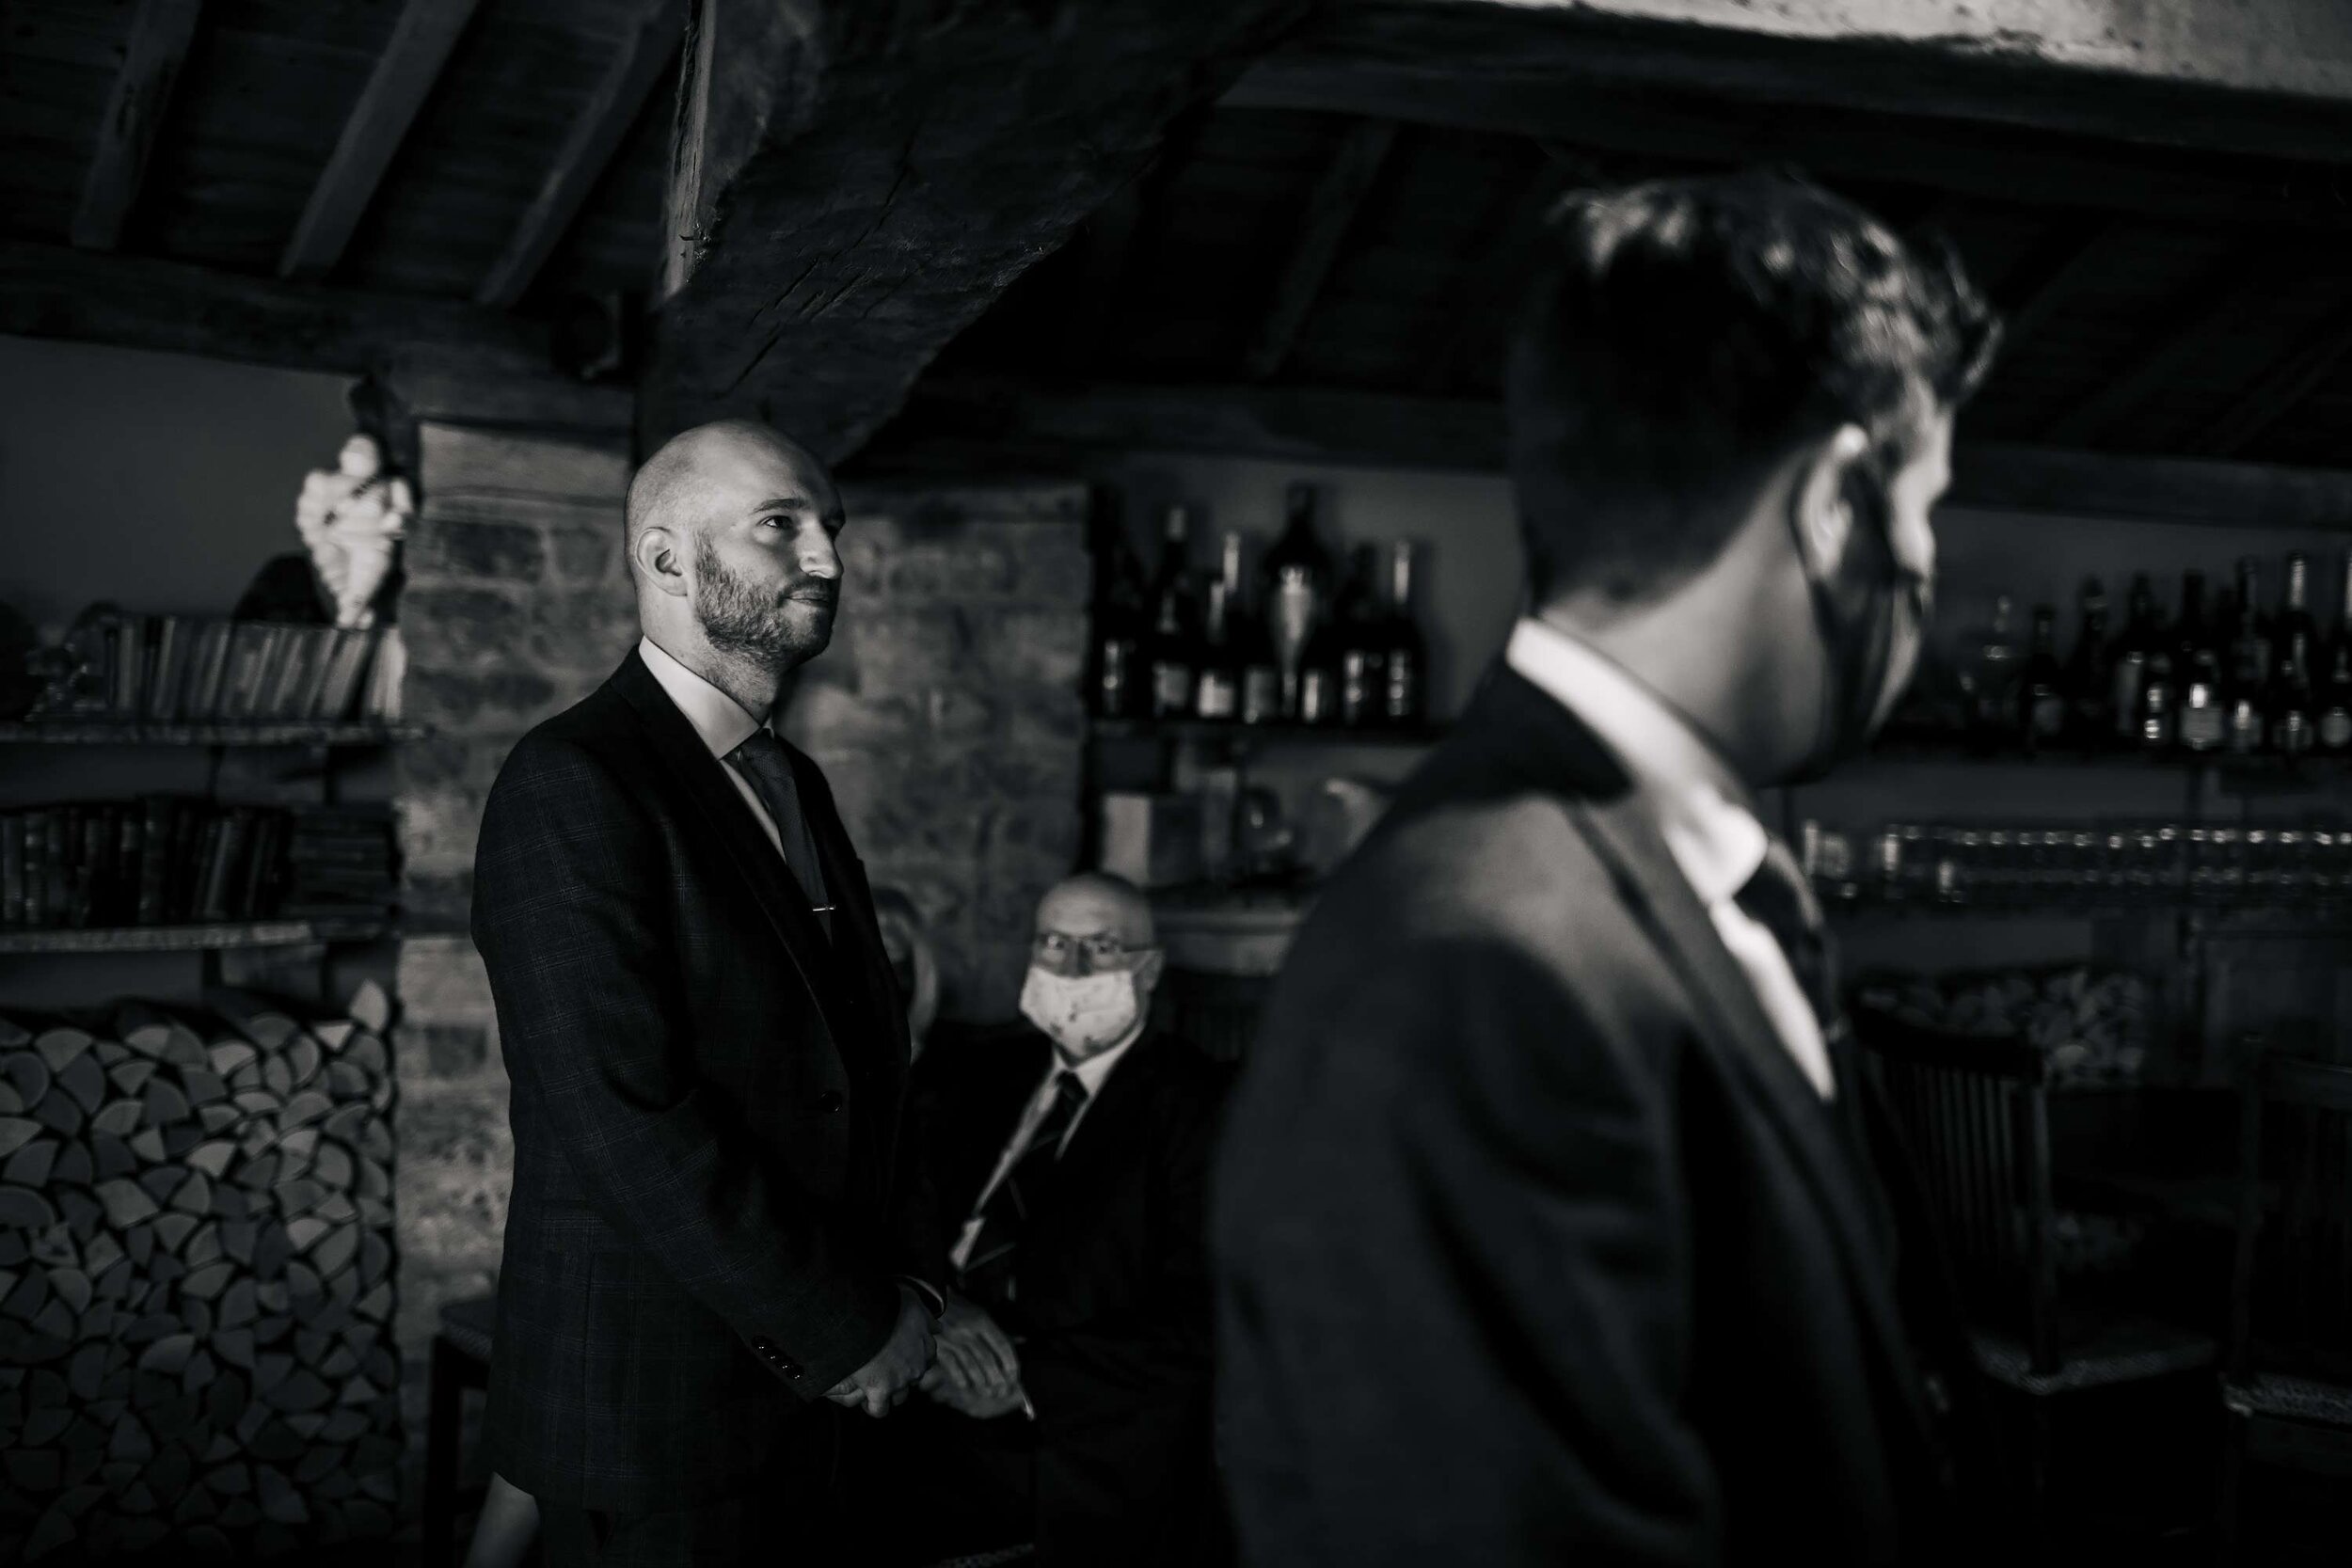 Groom awaits his bride at a wedding ceremony in Yorkshire